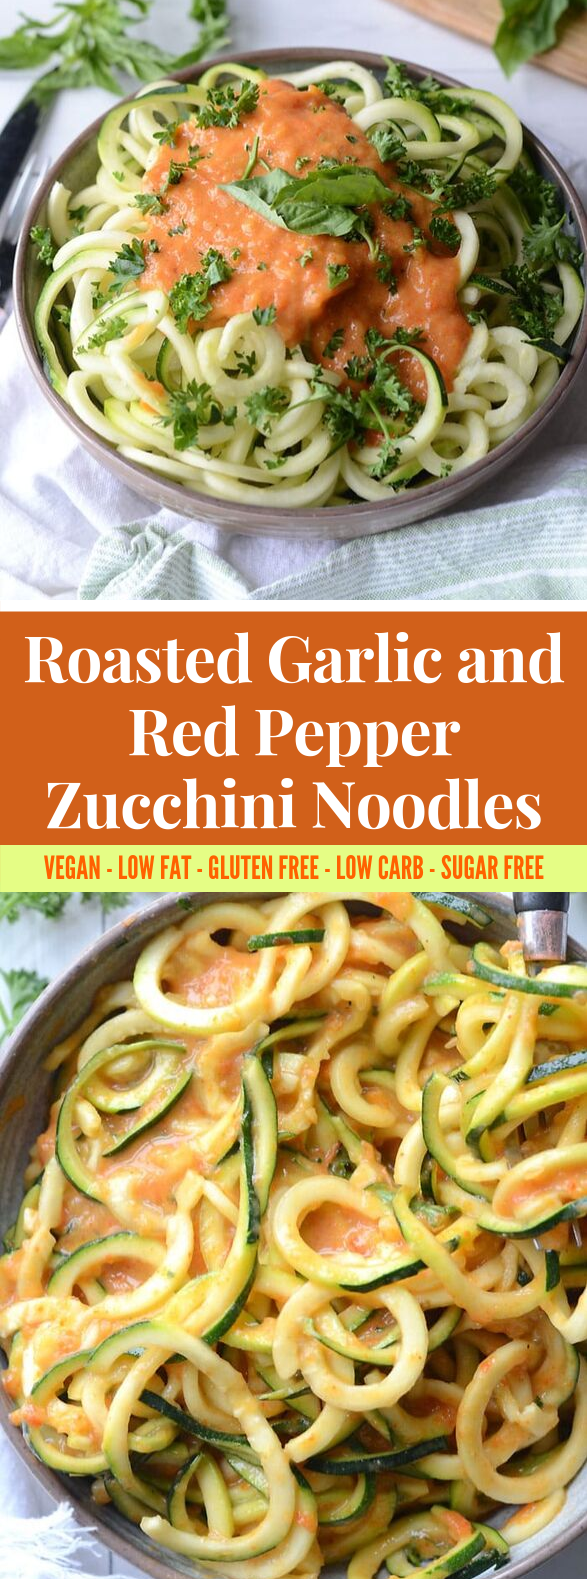 ROASTED GARLIC AND RED PEPPER ZOODLES #vegan #lowcalorie